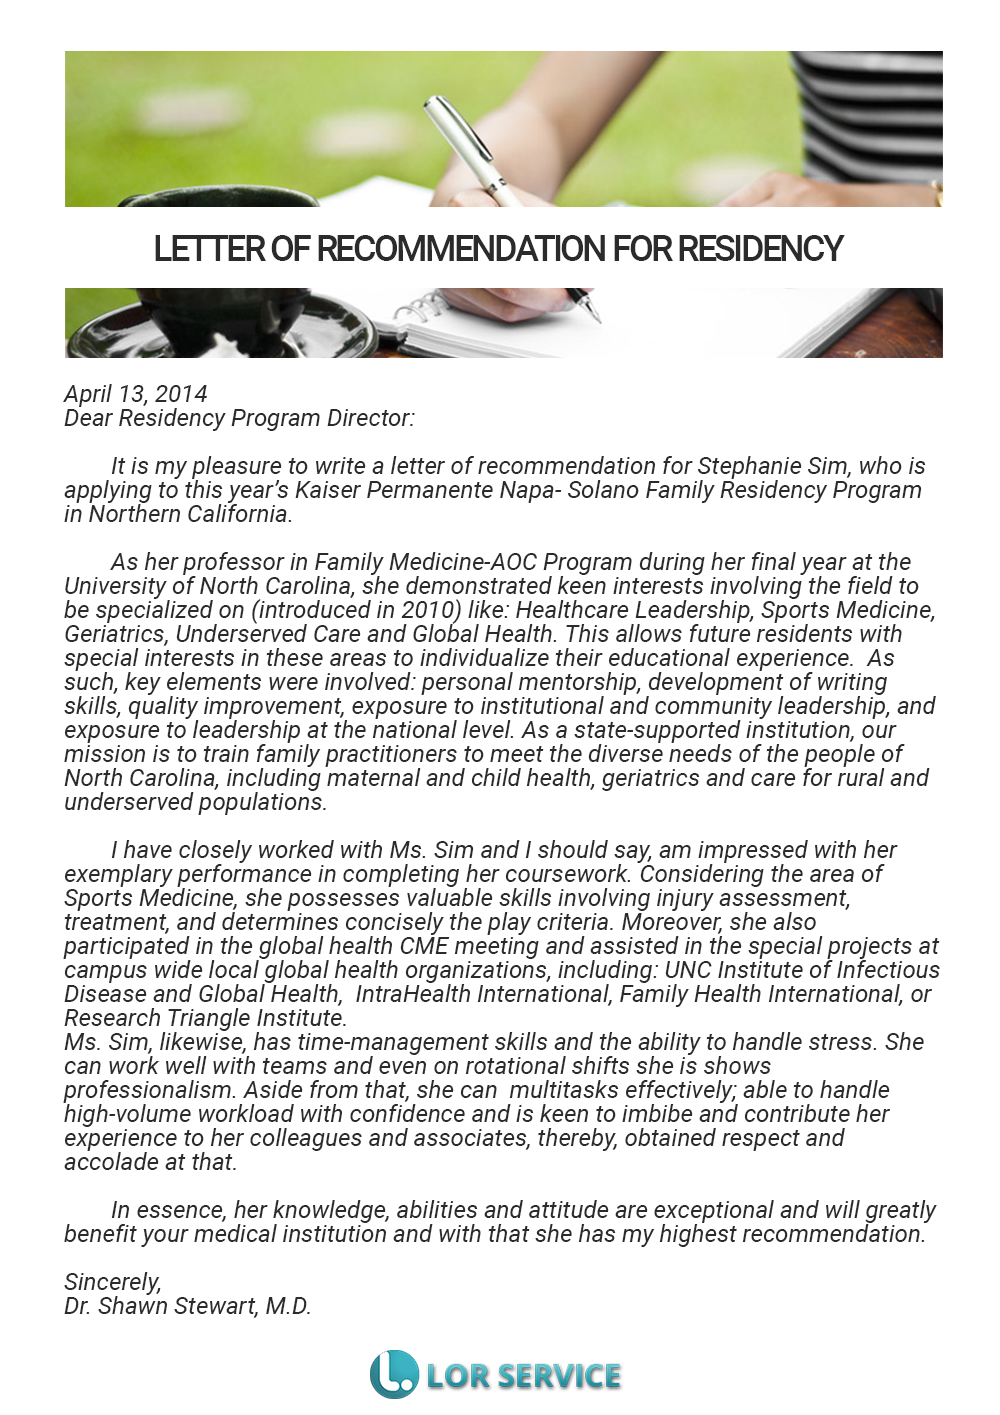 How to Write Medical Referral Letters